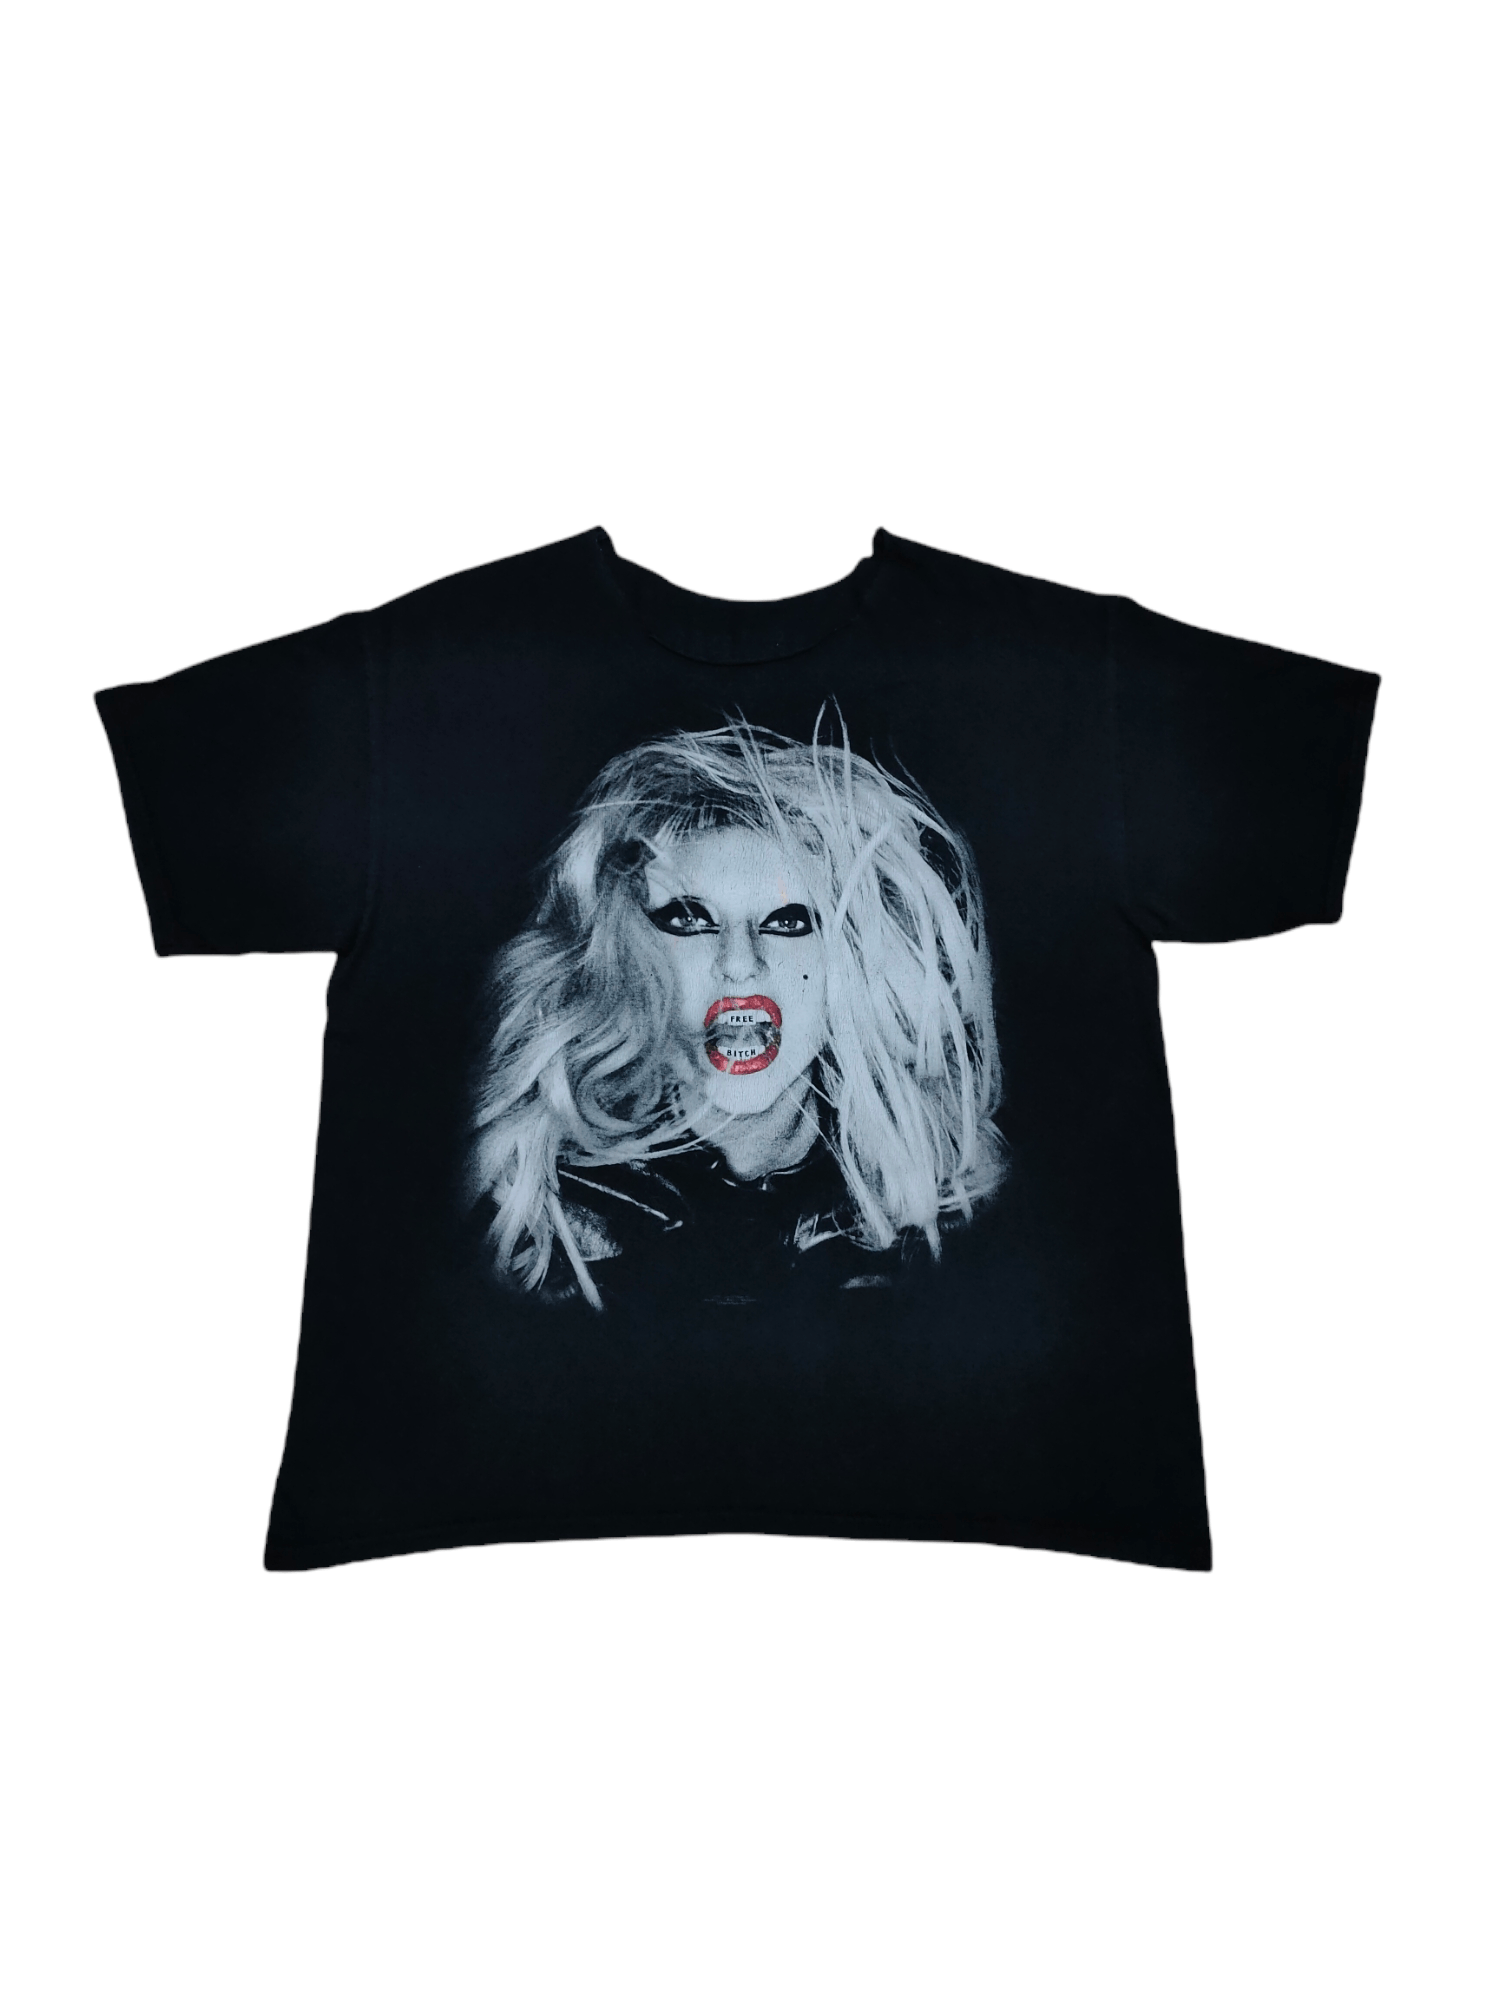 Pre-owned Band Tees X Rap Tees Lady Gaga The Born This Way Tour Distressed T-shirt In Black